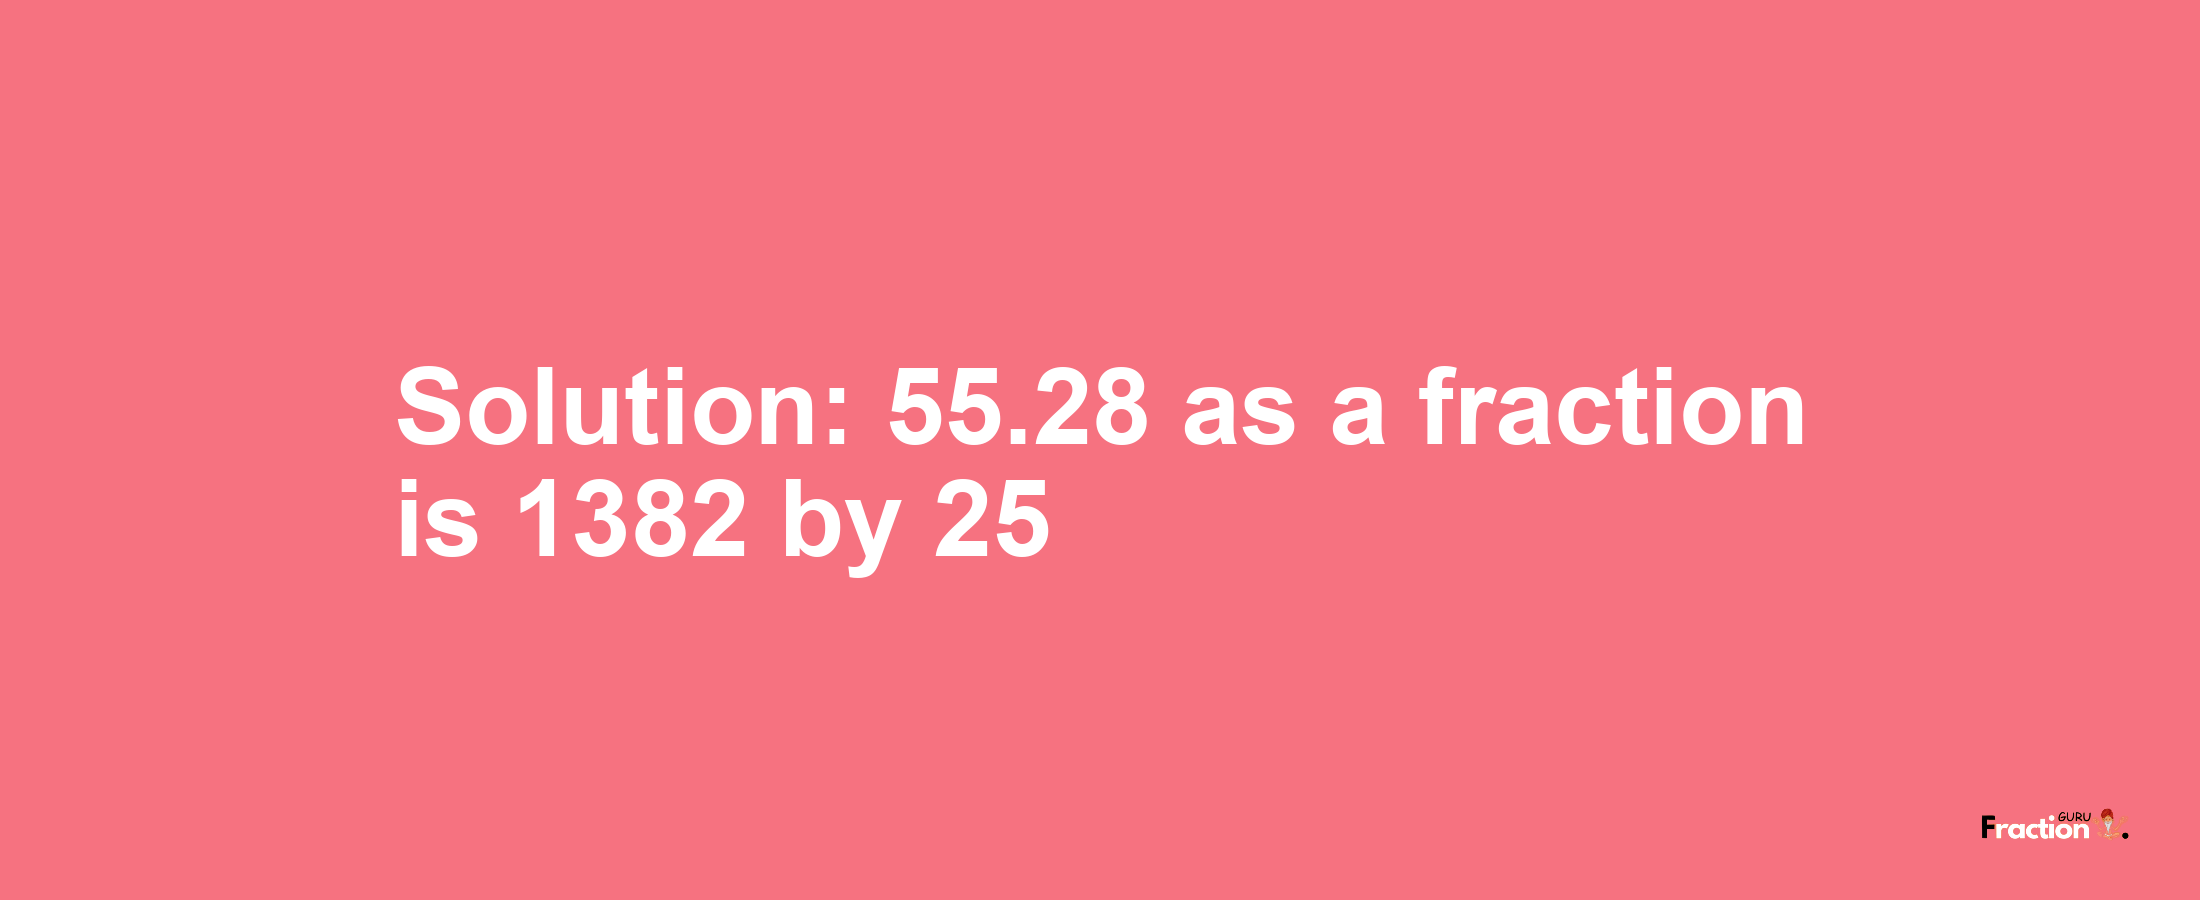 Solution:55.28 as a fraction is 1382/25